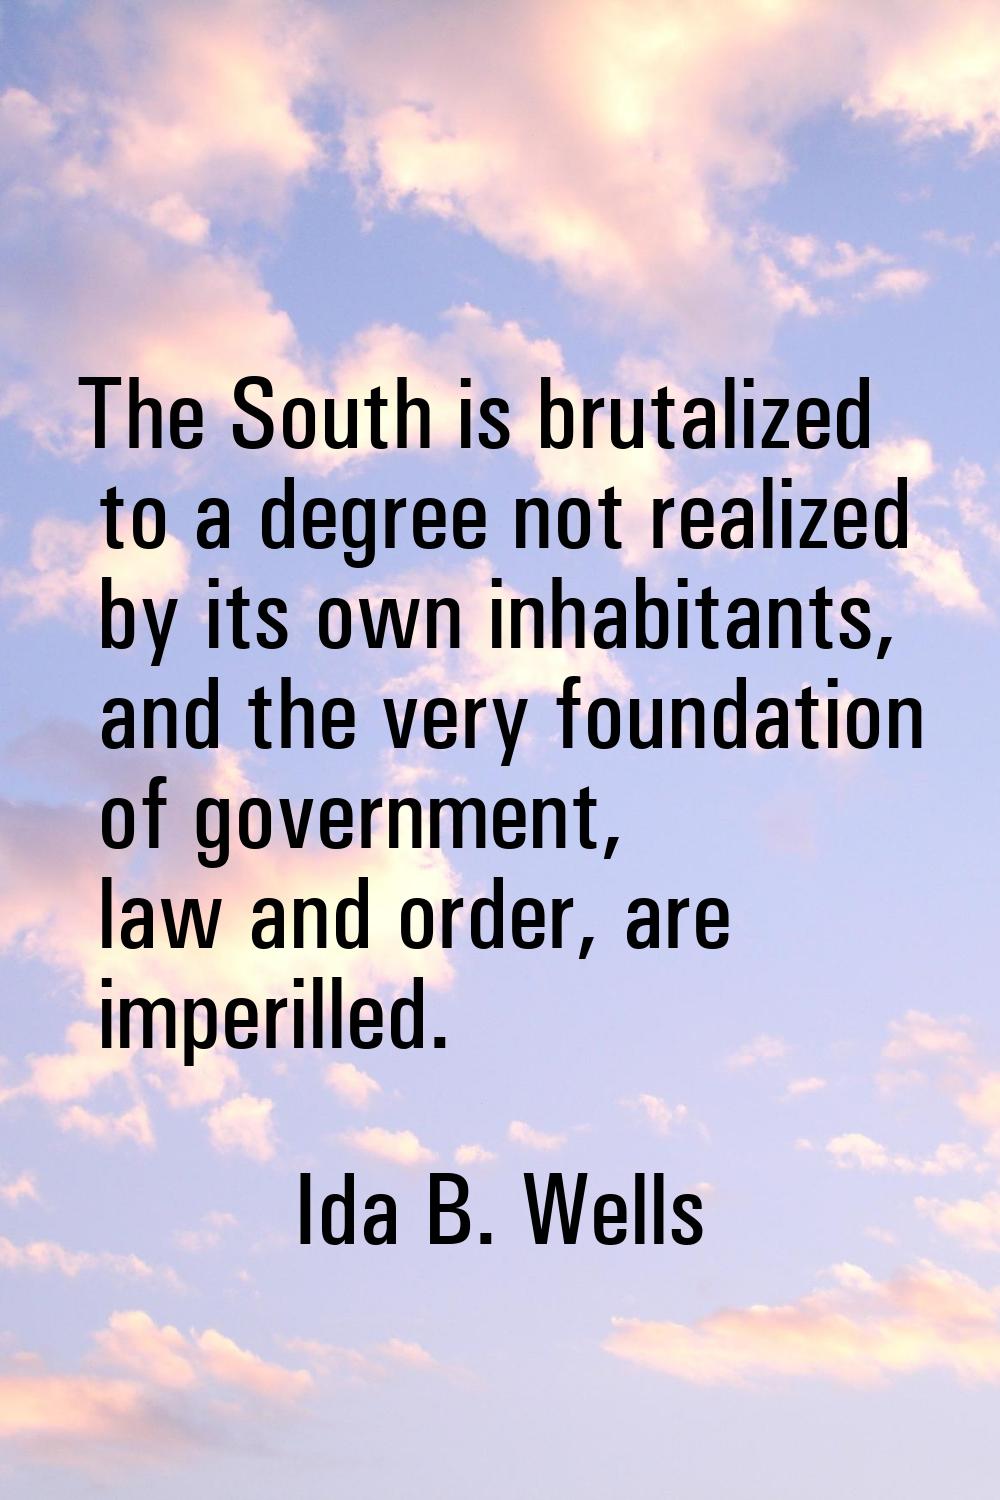 The South is brutalized to a degree not realized by its own inhabitants, and the very foundation of